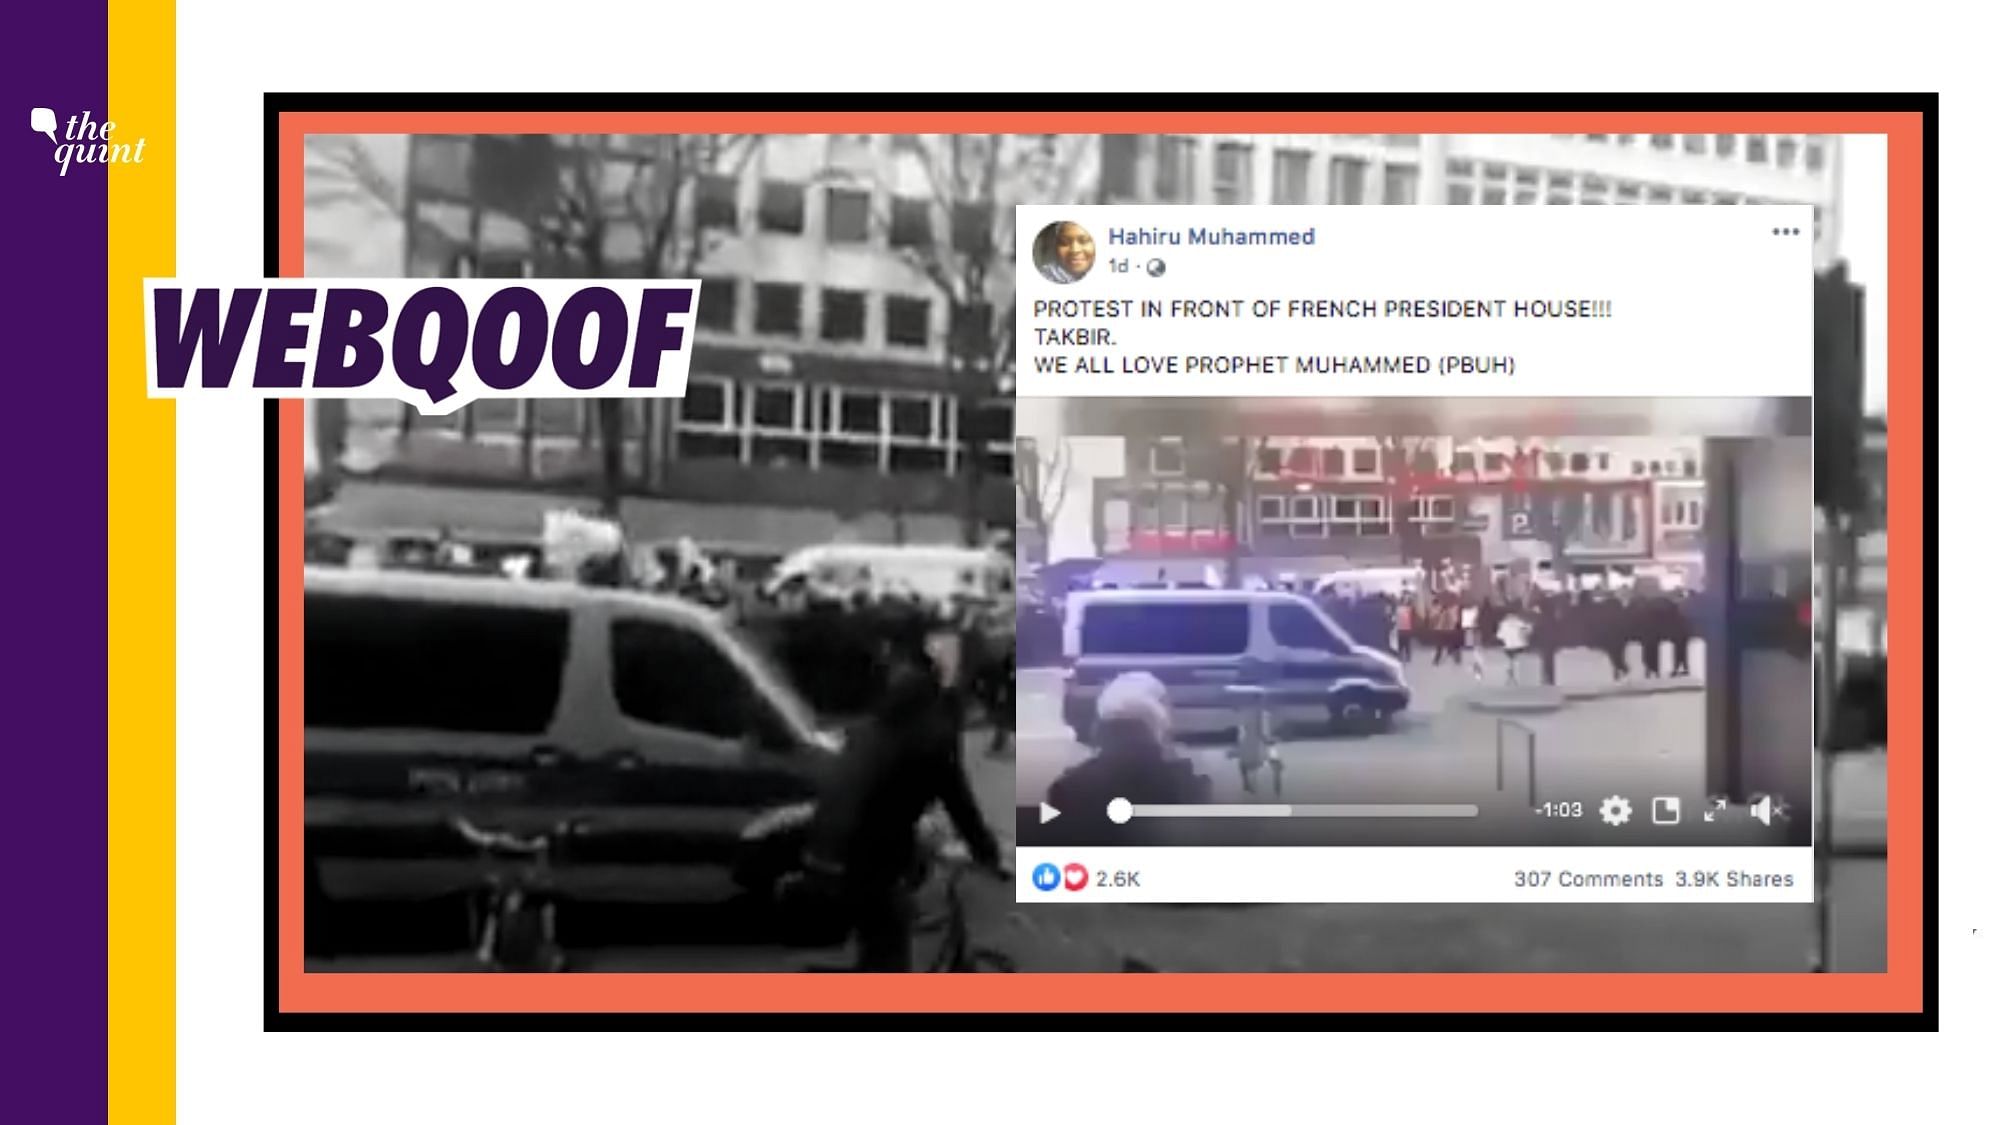 A video from Hamburg in Germany has been falsely used to claim that it shows a protest in front of house of France’s president.